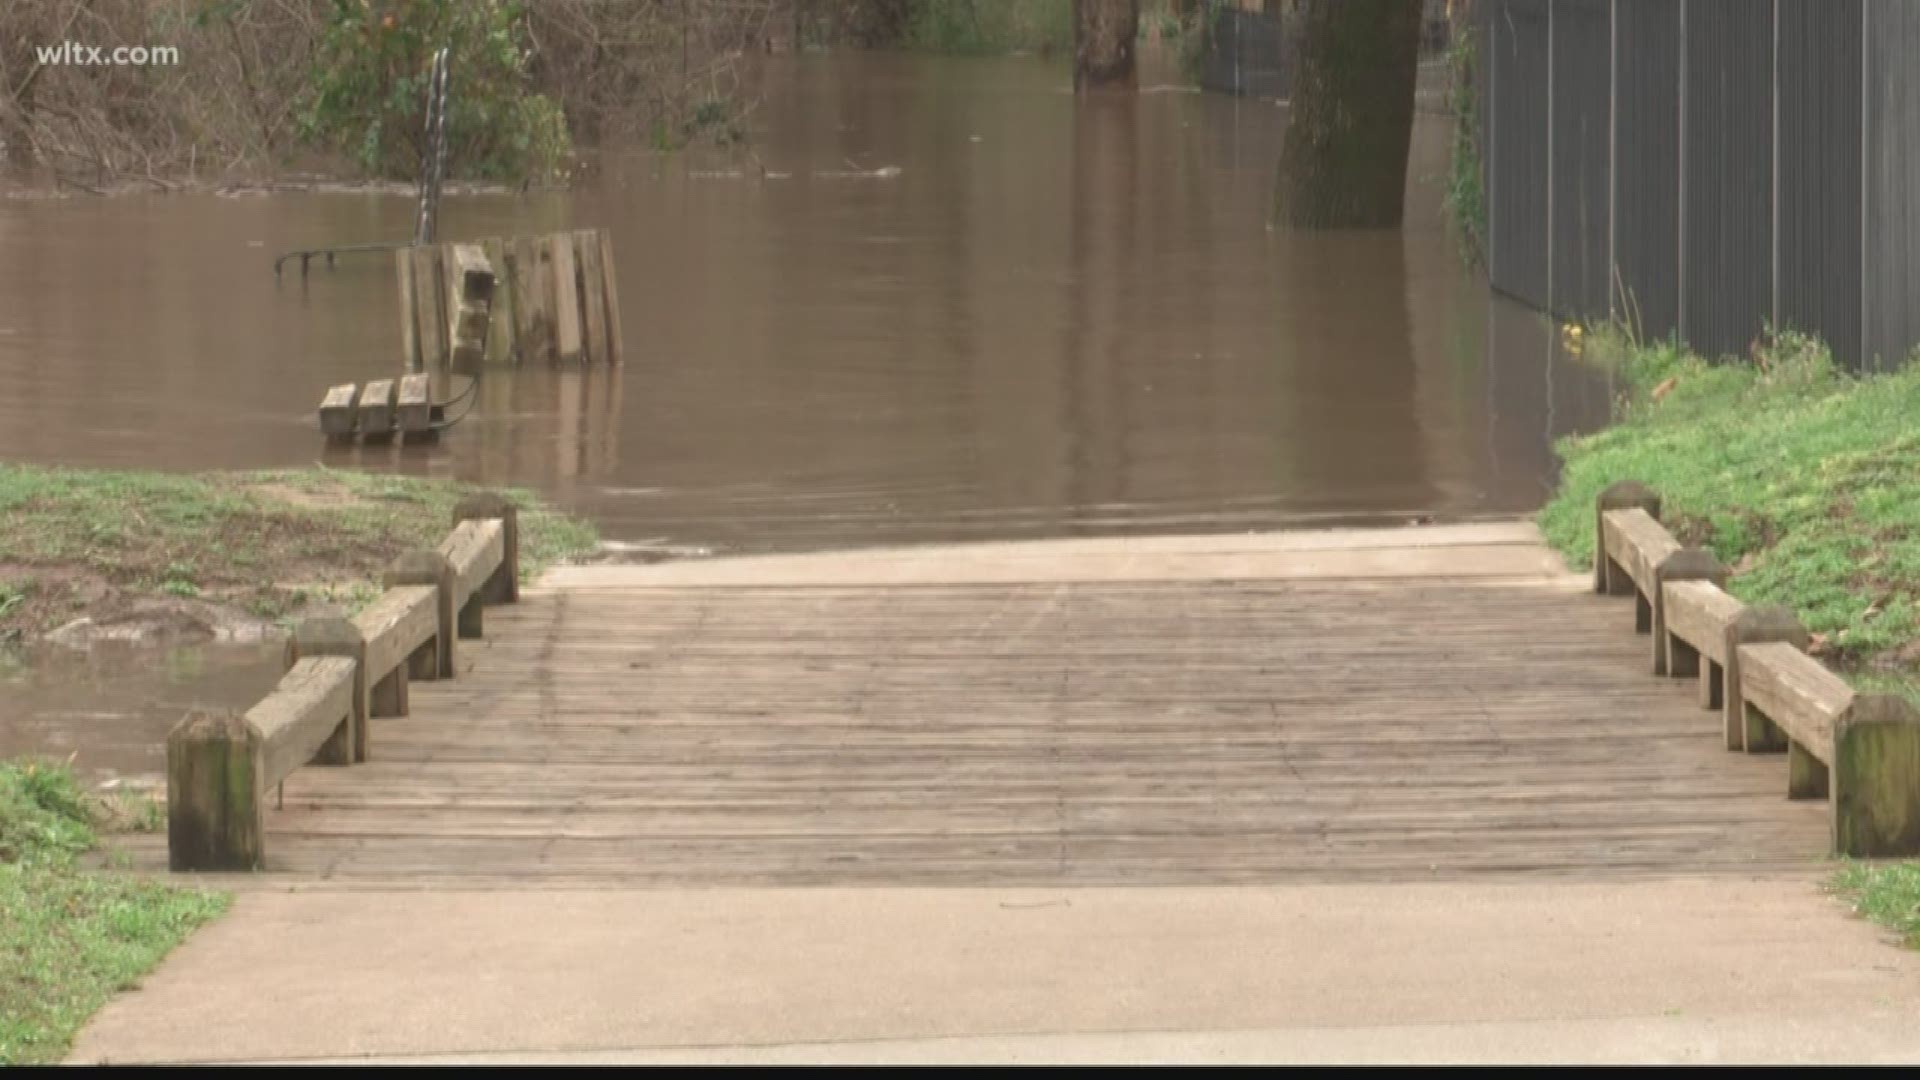 The recent high rainwaters means the Cayce Riverwalk will be closed for a few days.